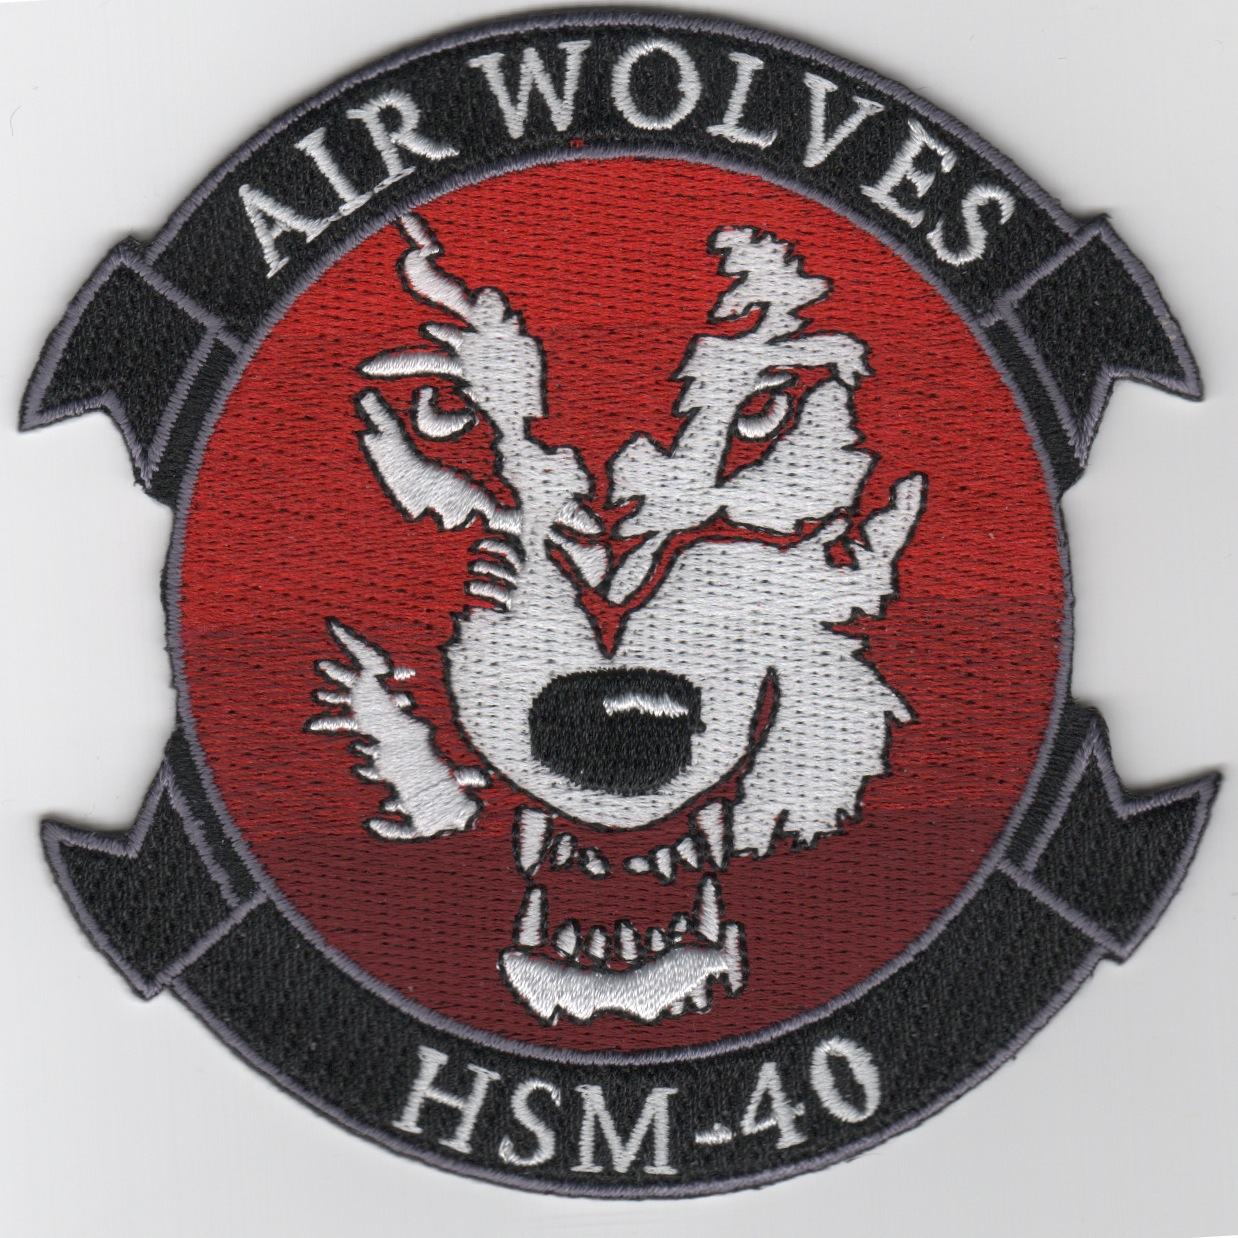 HSM-40 Squadron Patch (Red)